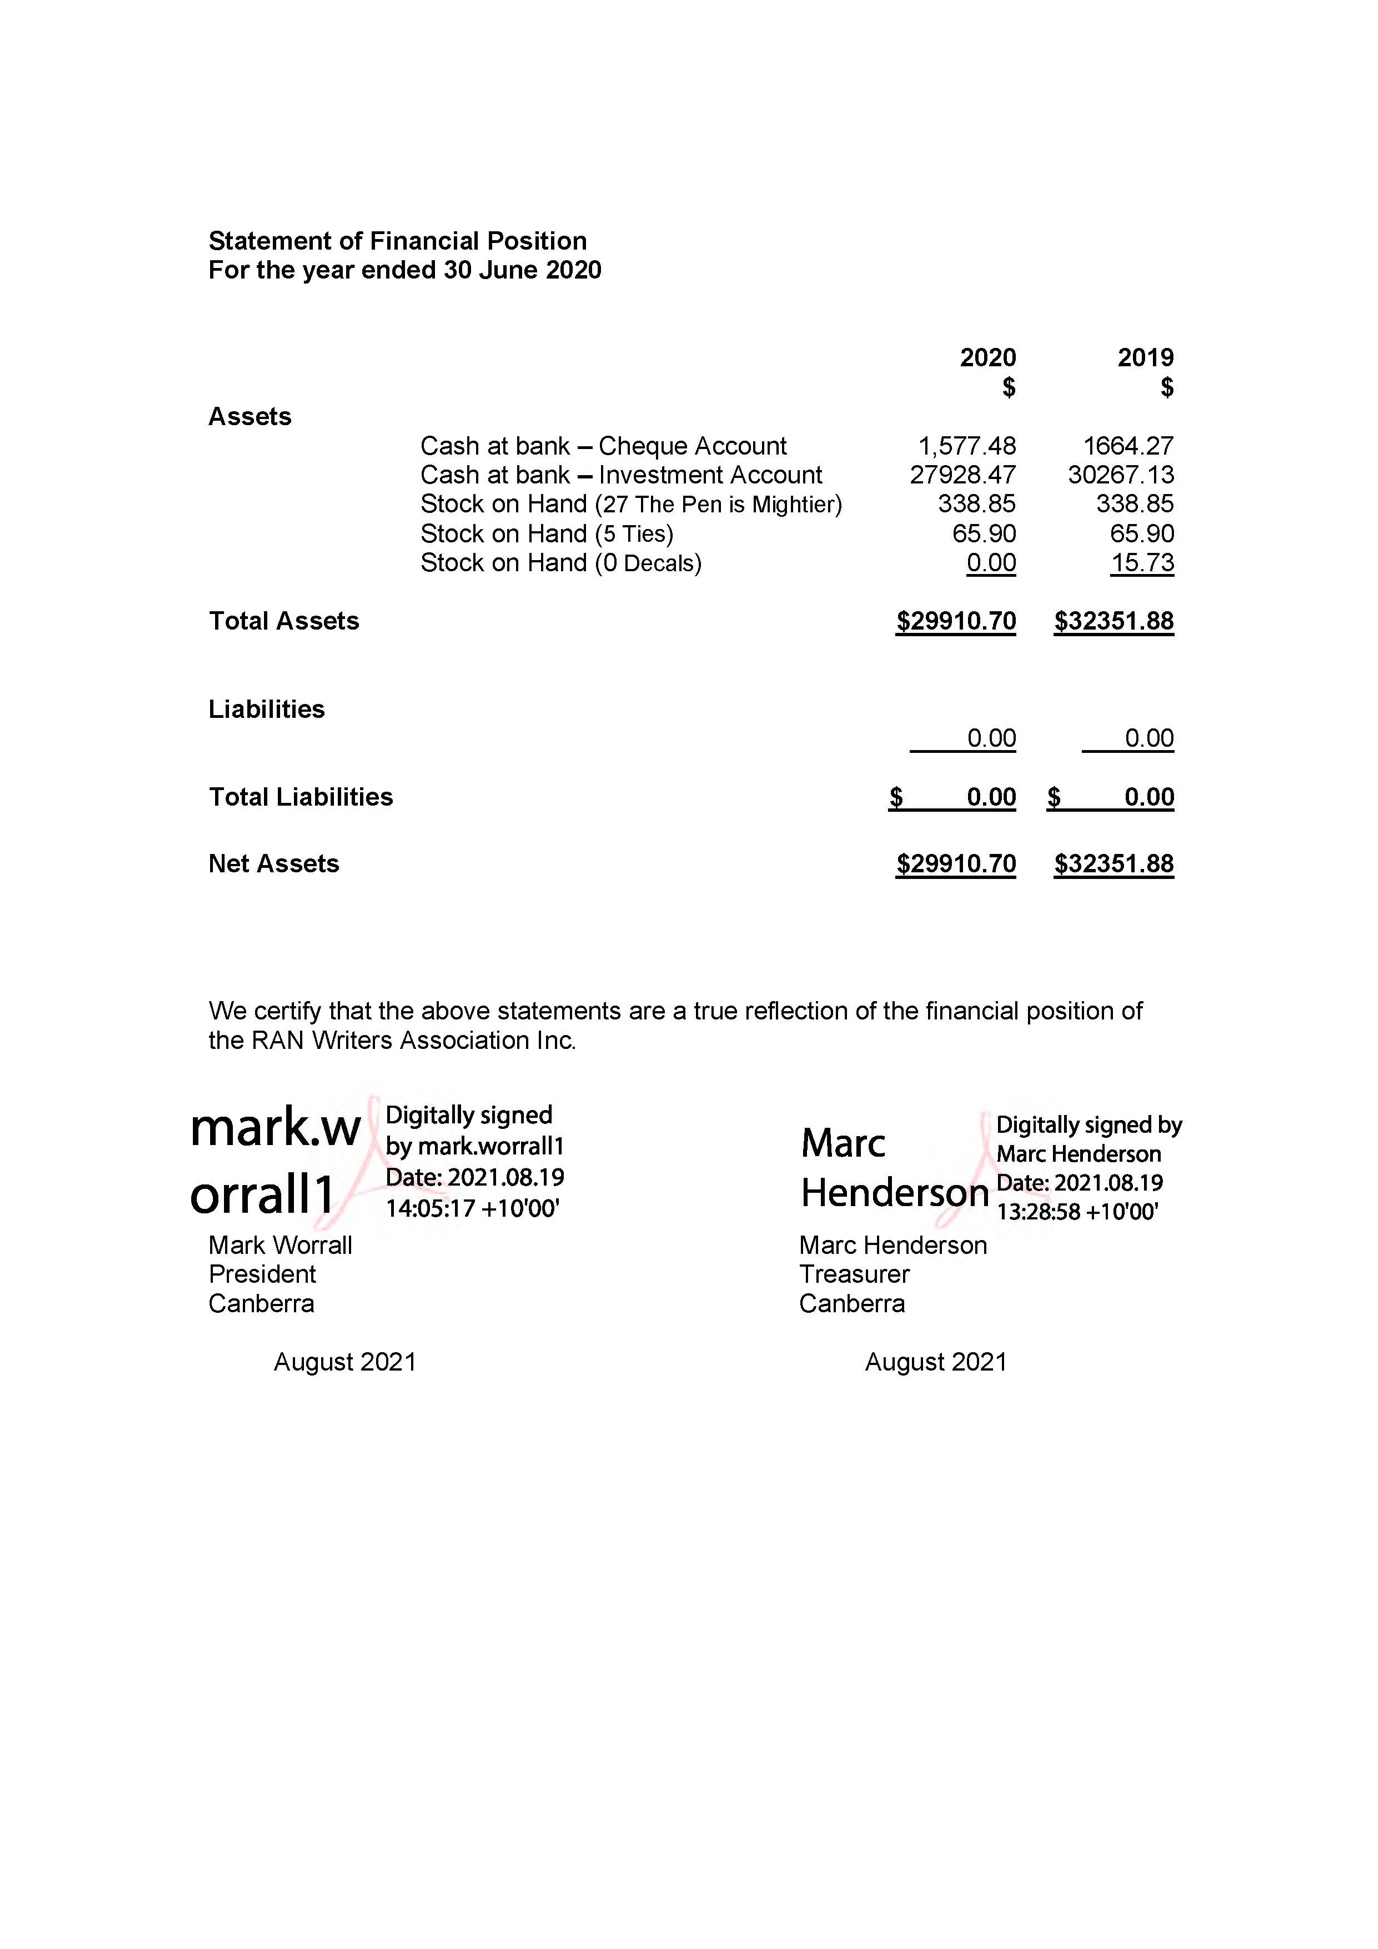 A picture containing text, receipt, screenshot

Description automatically generated